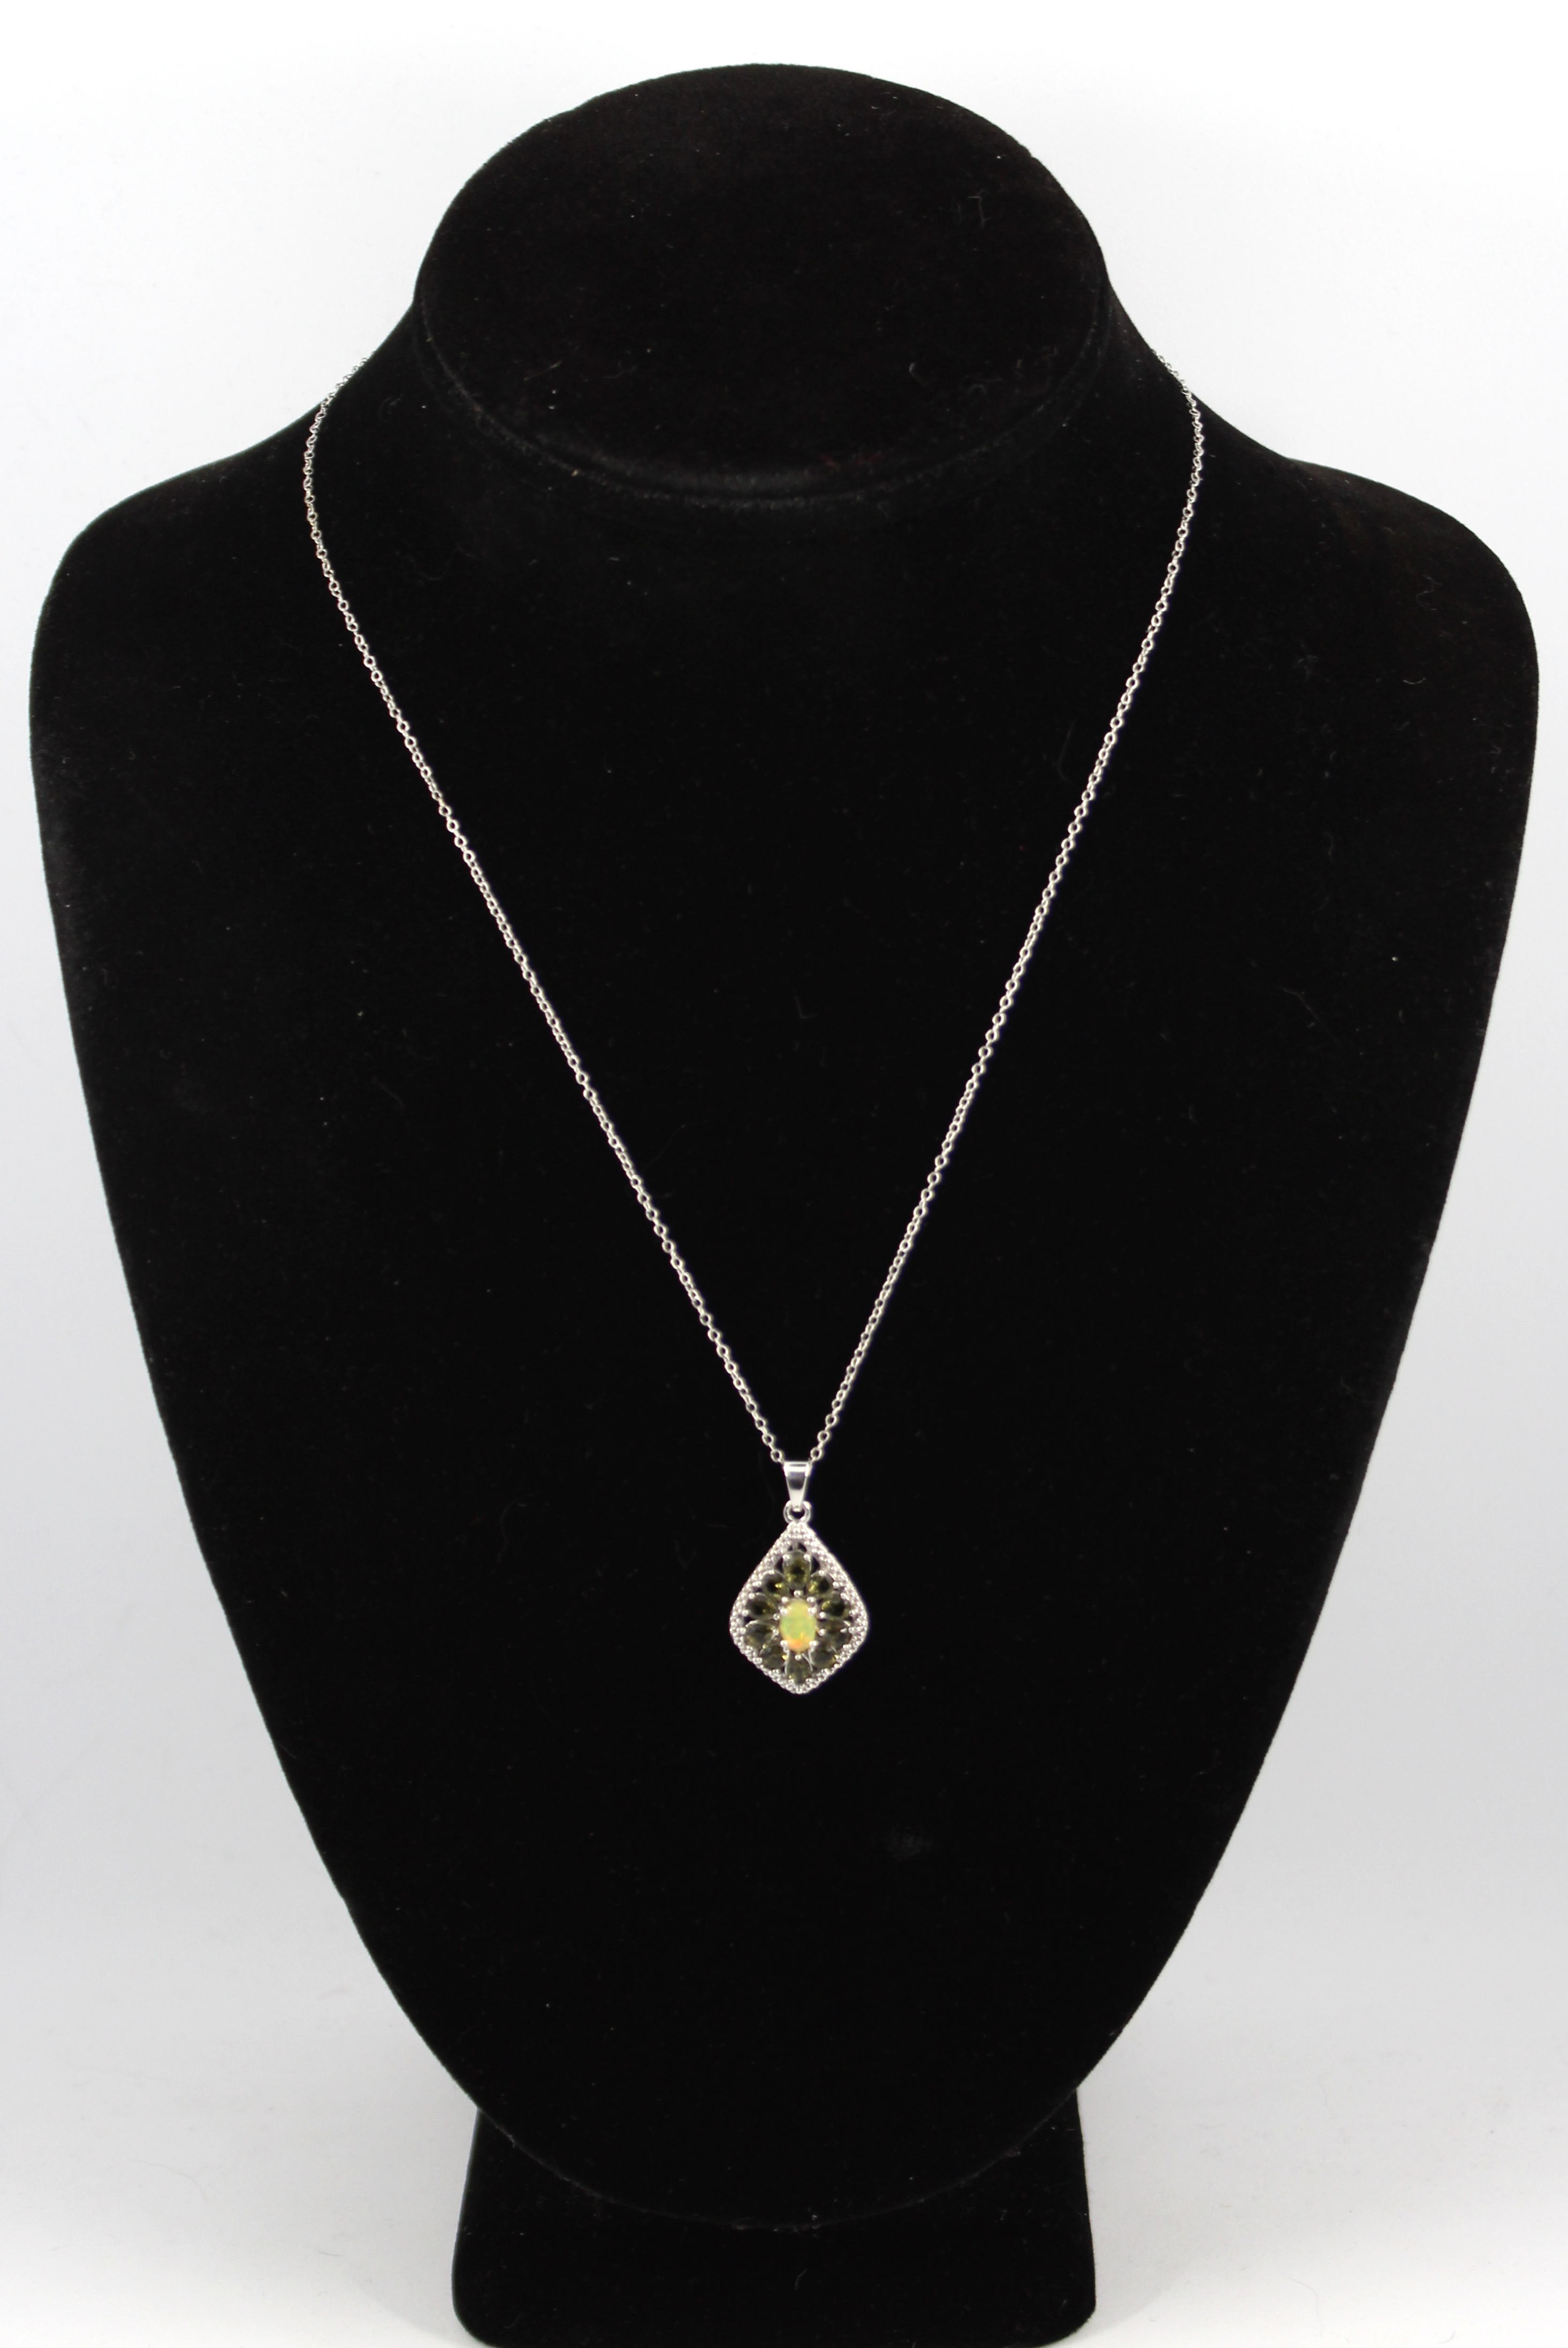 SILVER, OPAL AND TOURMALINE NECKLACE